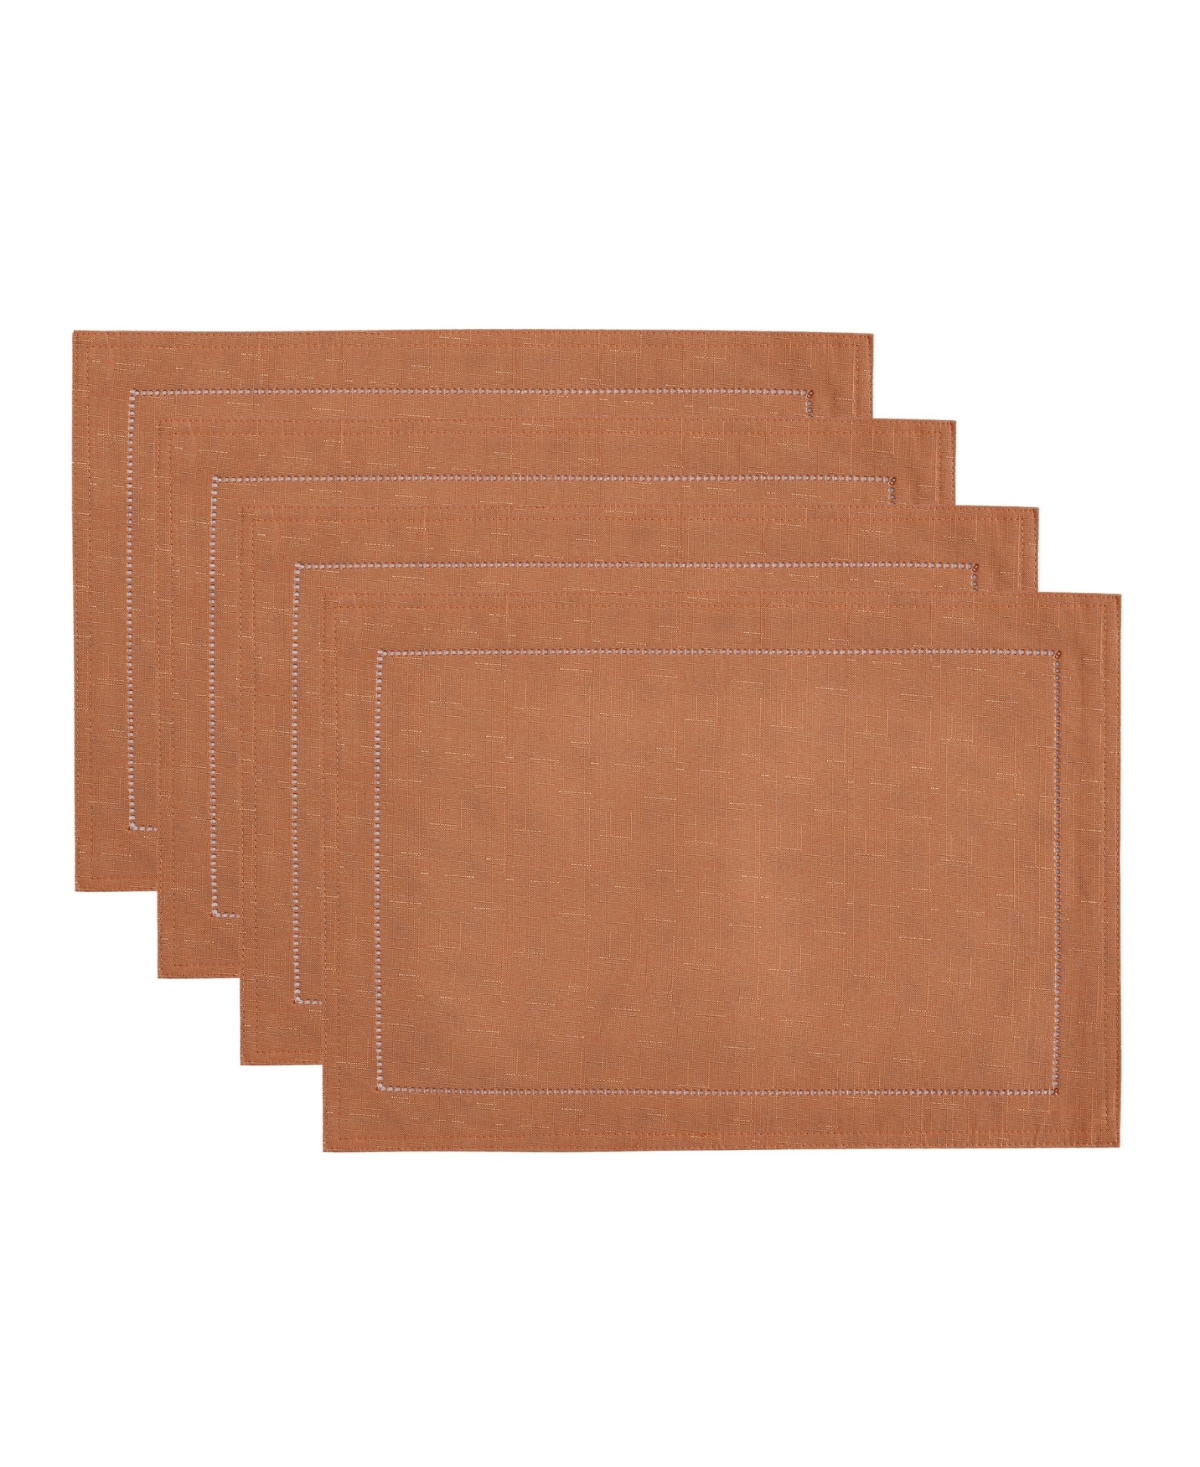 Elrene Alison Eyelet Punched Border Fabric Placemat, Set Of 4 In Terracotta